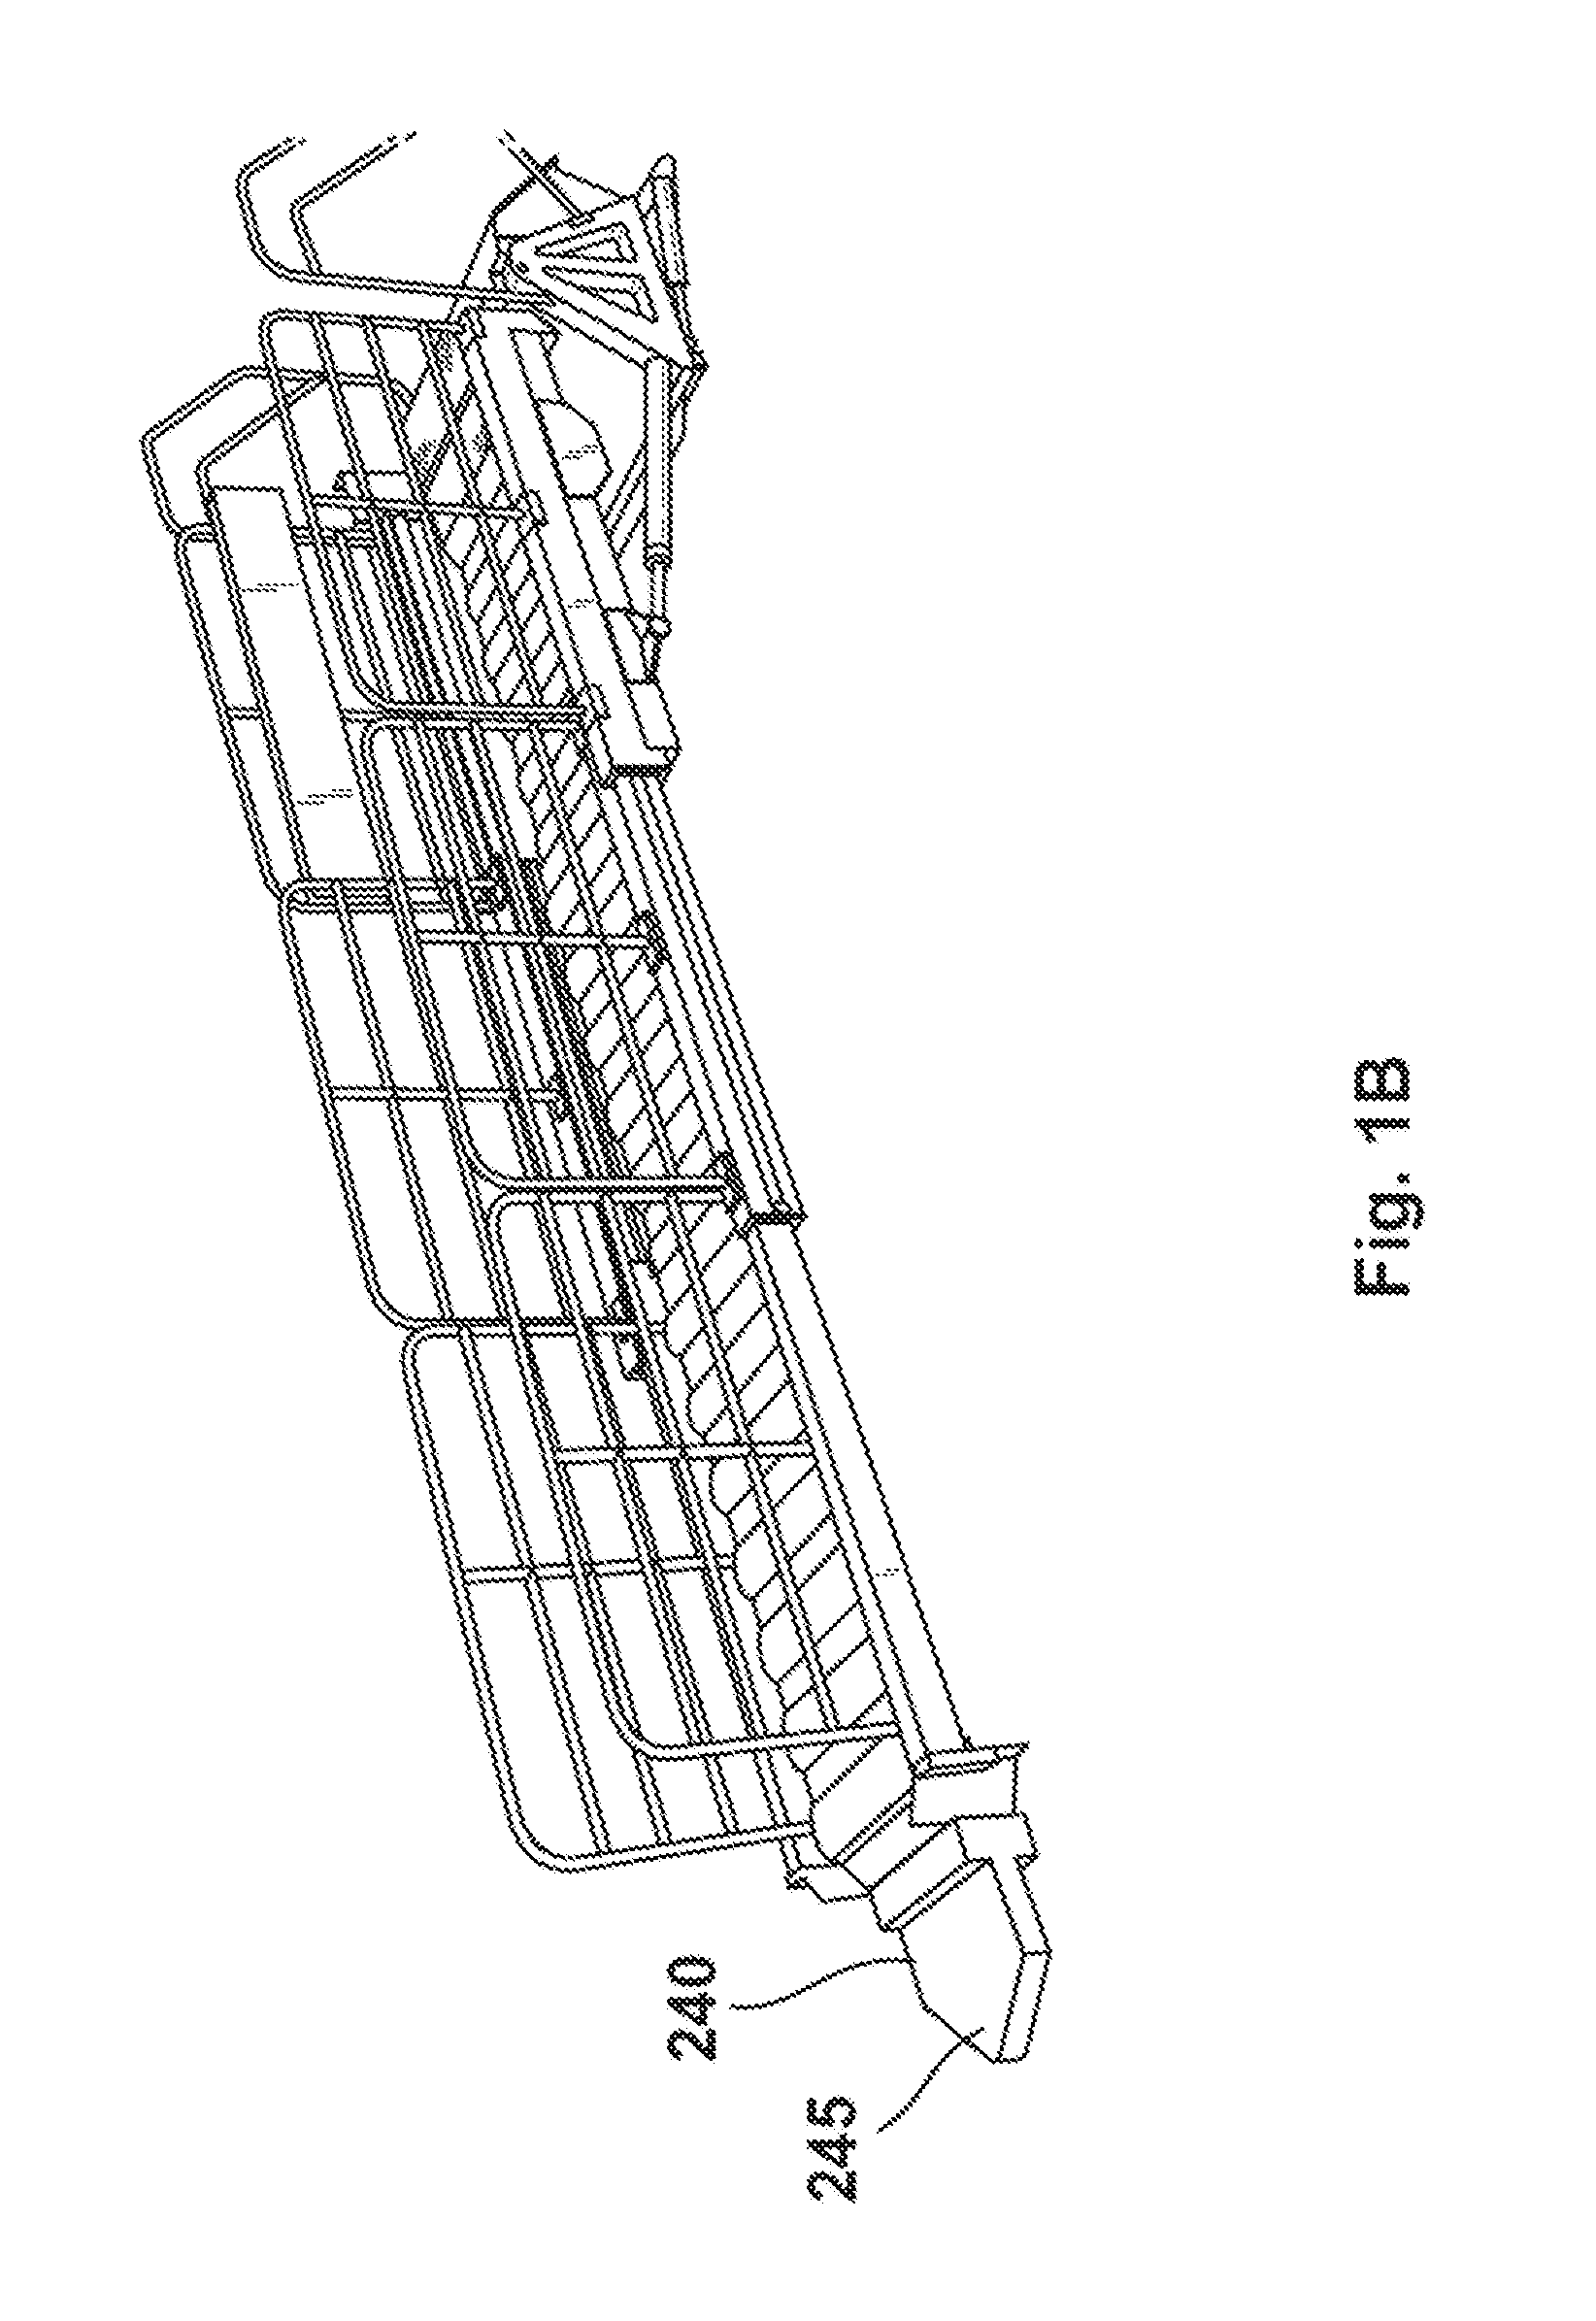 Apparatus and method for providing active motion compensation control of an articulated gangway